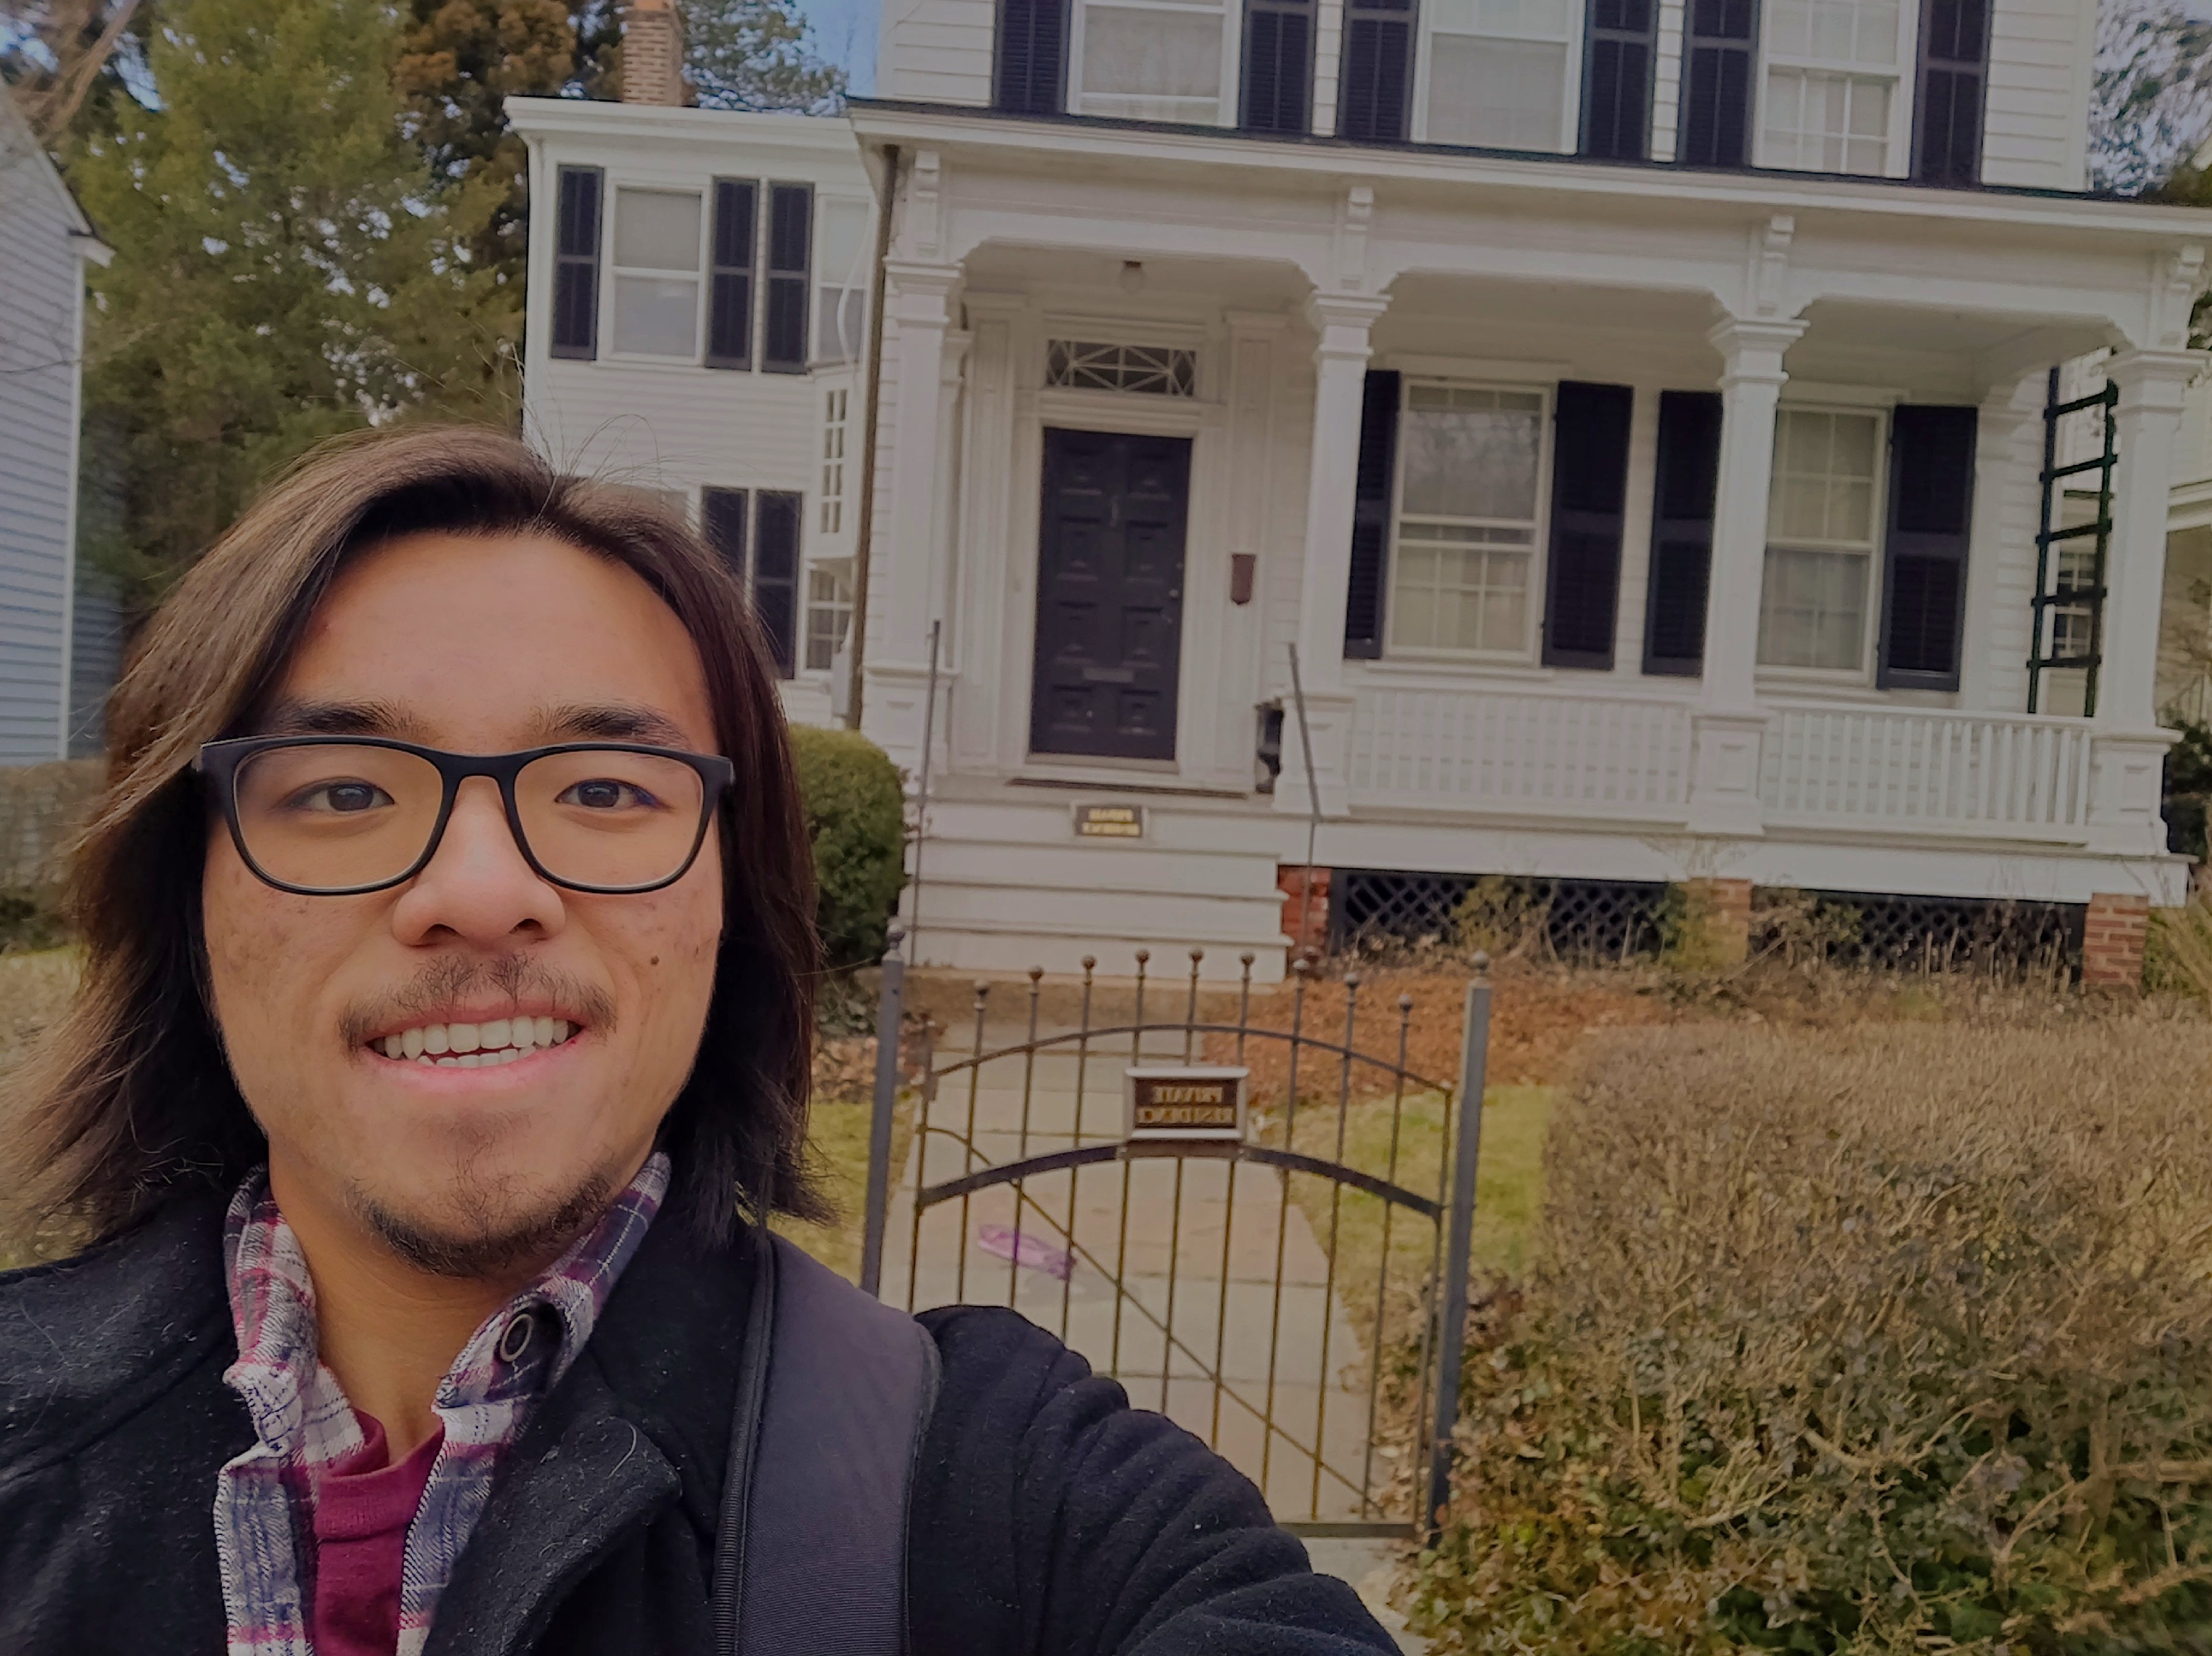 Me visiting Albert Einstein's house during a conference trip to Princeton